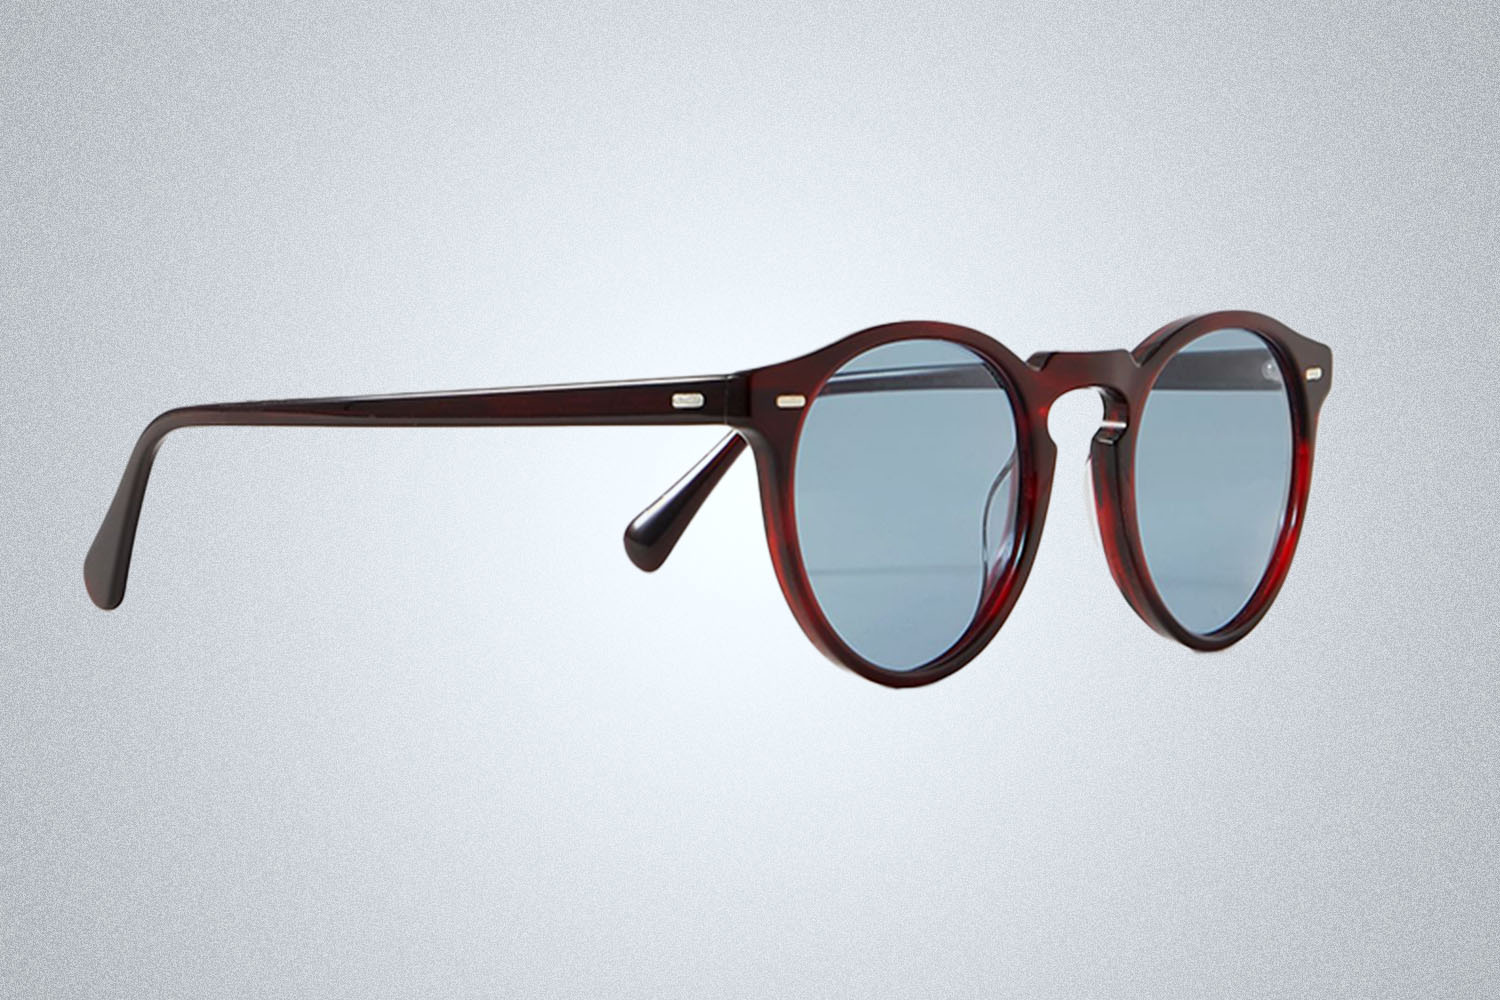 a pair of designer sunglasses from Oliver Peoples on a grey background